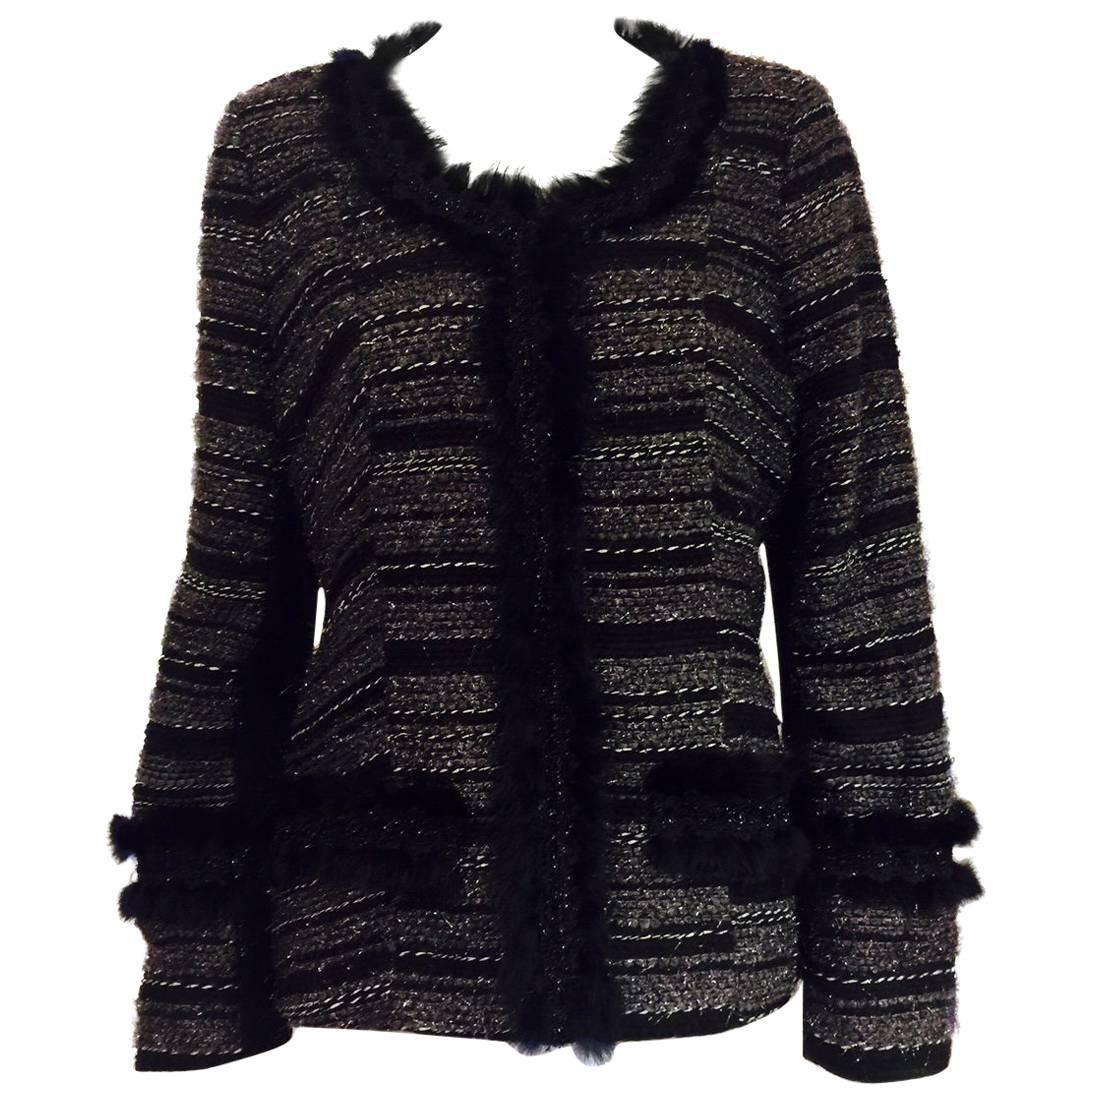 Neiman Marcus Black & Grey Boucle Jacket with Metallic Threads Overall For Sale